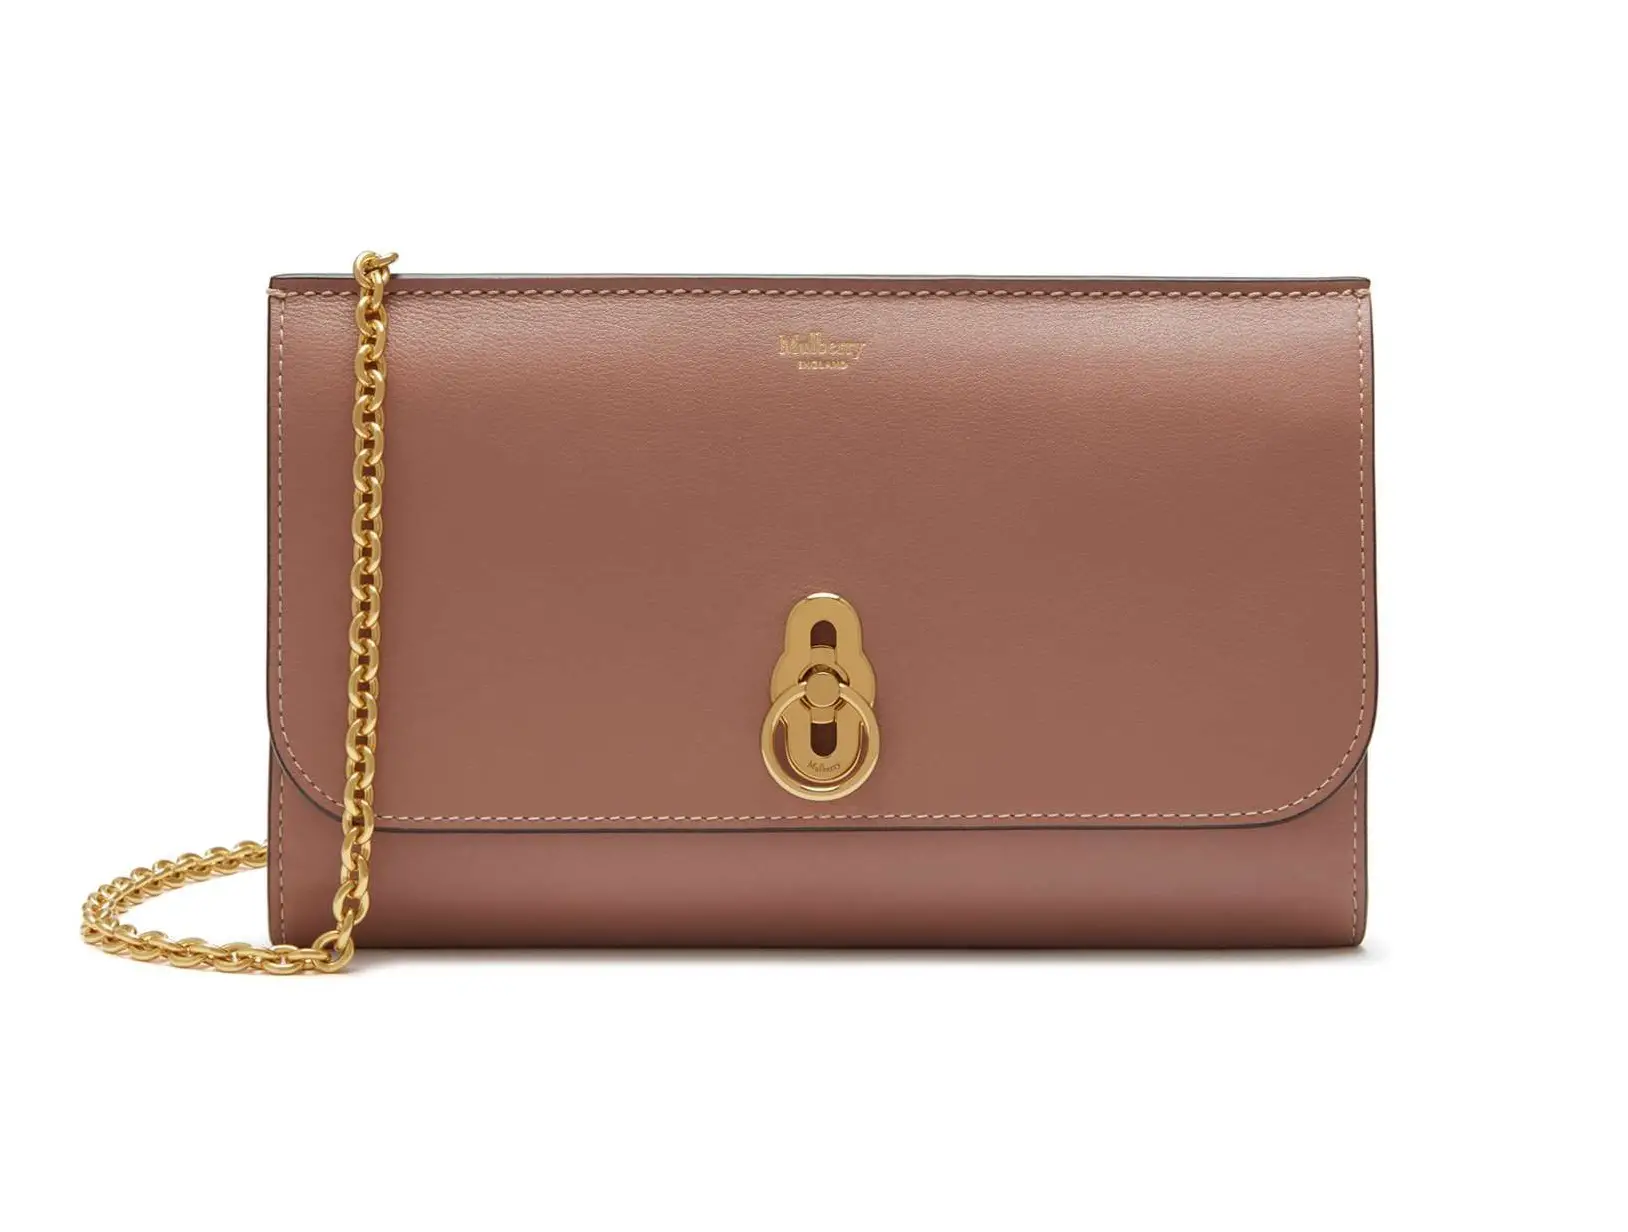 The Duchess of Cambridge carried Mulberry Amberley Nude Blush Leather Clutch